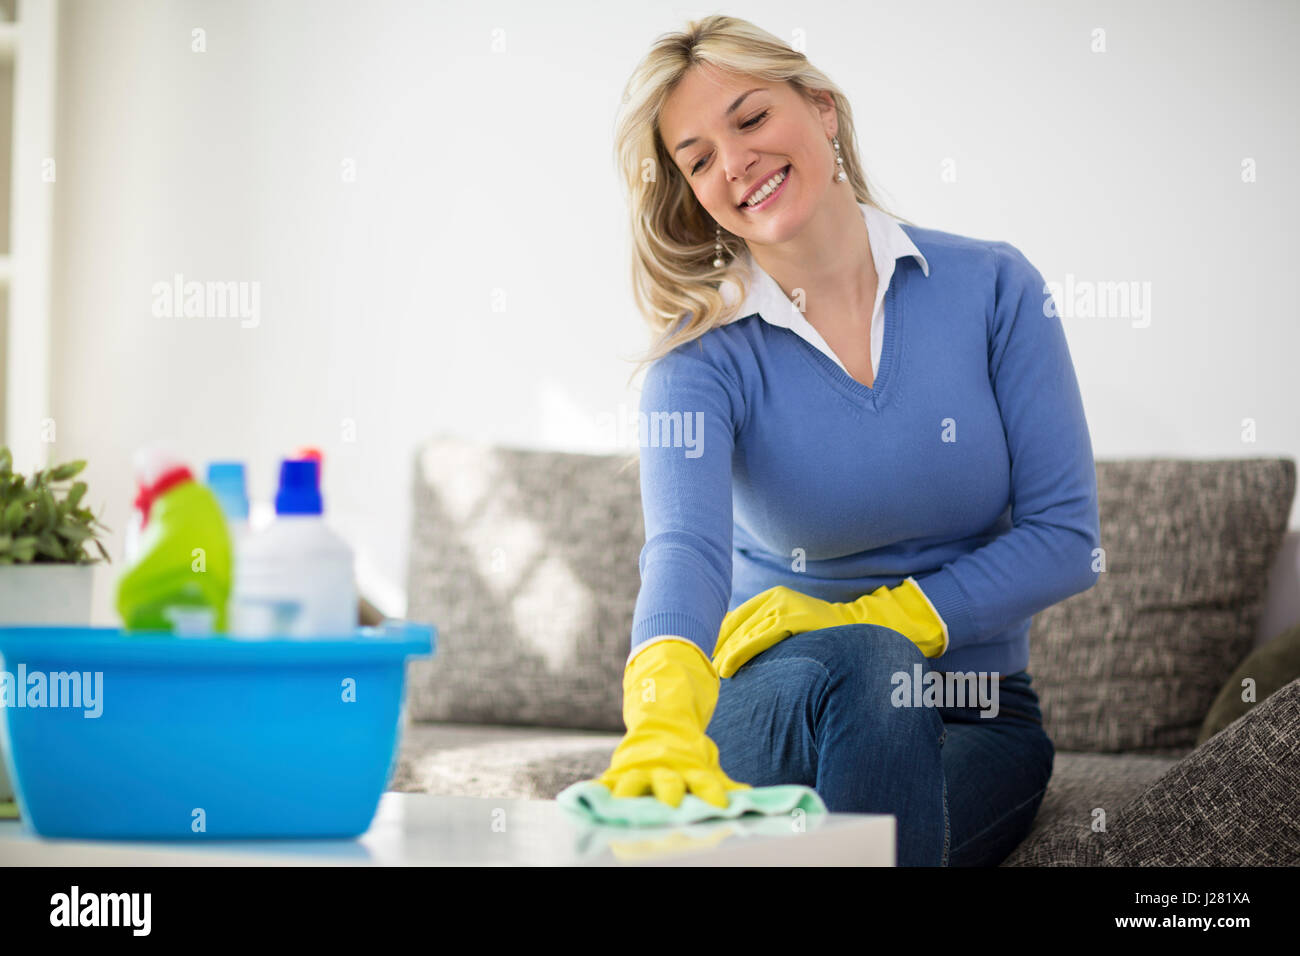 Housewife begins cleaning houses with cleaning products Stock Photo